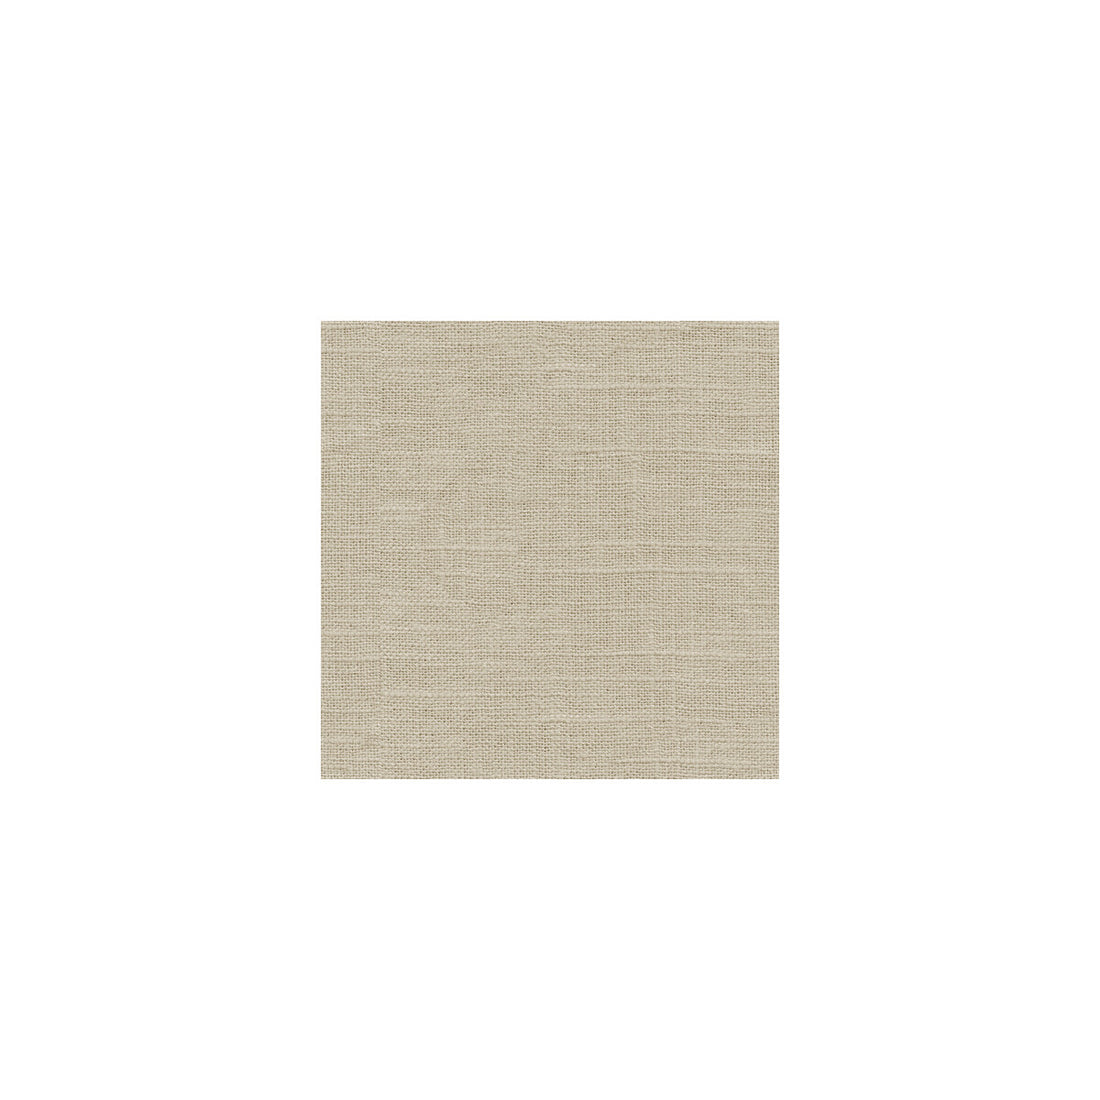 Barnegat fabric in natural color - pattern 24573.106.0 - by Kravet Basics in the Perfect Plains collection